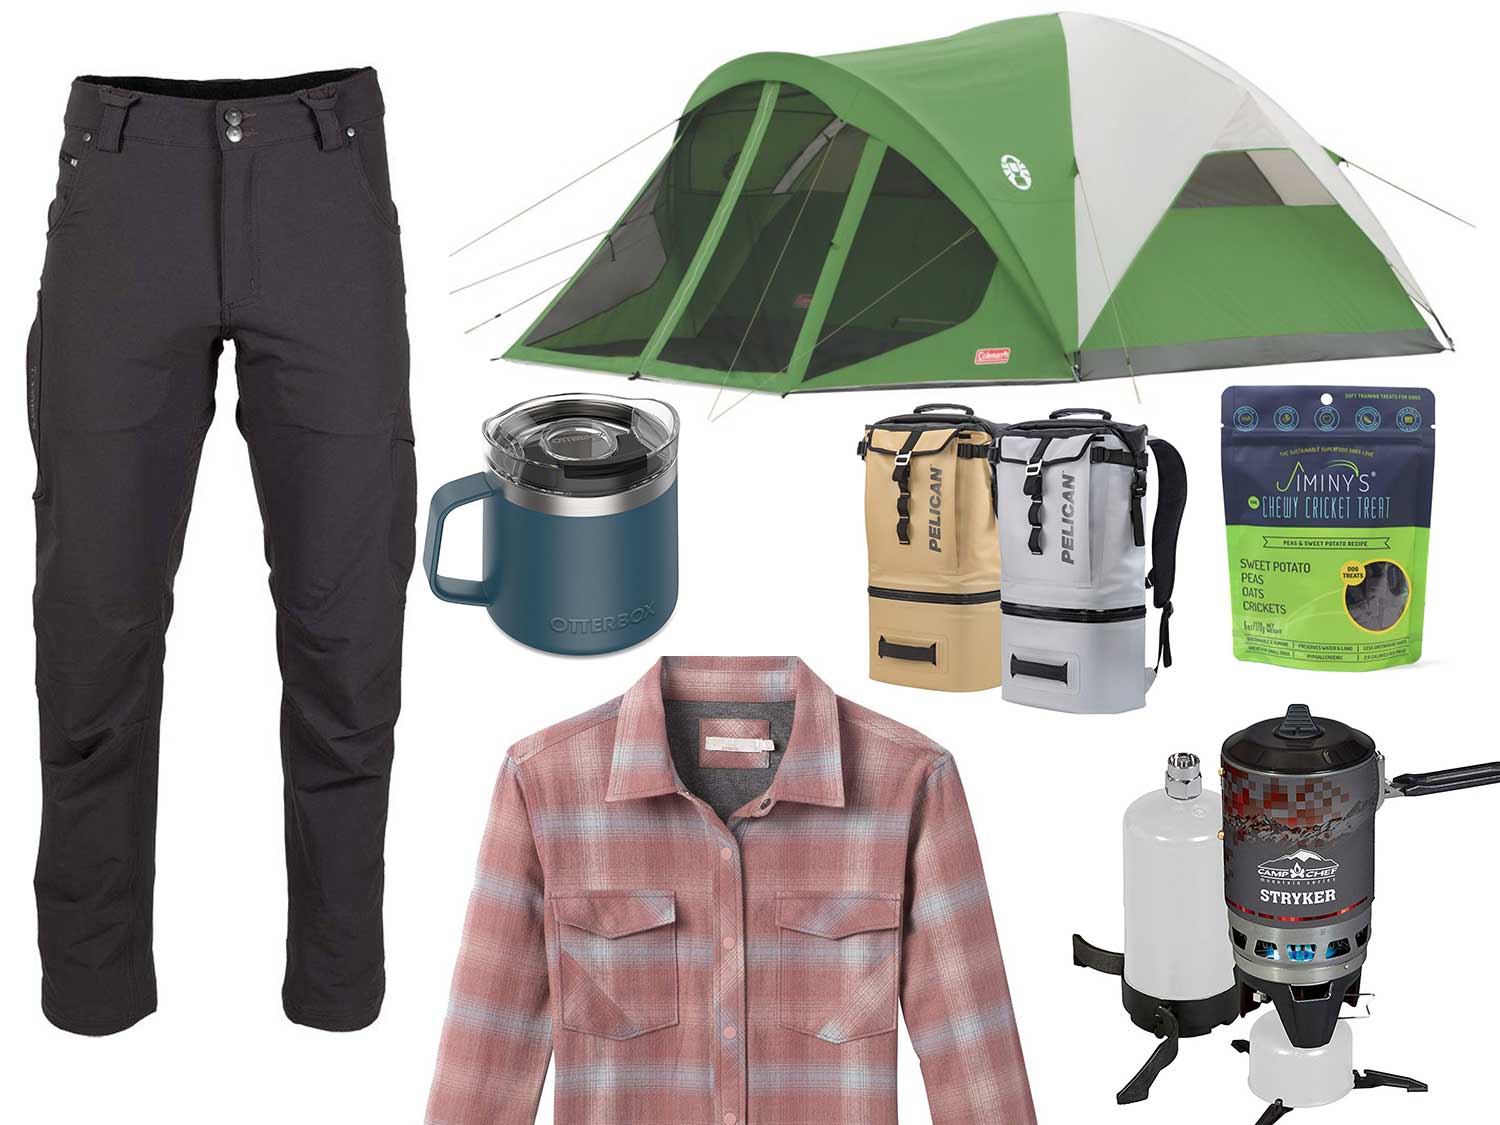 The 2020 Camping Gear Gift Guide